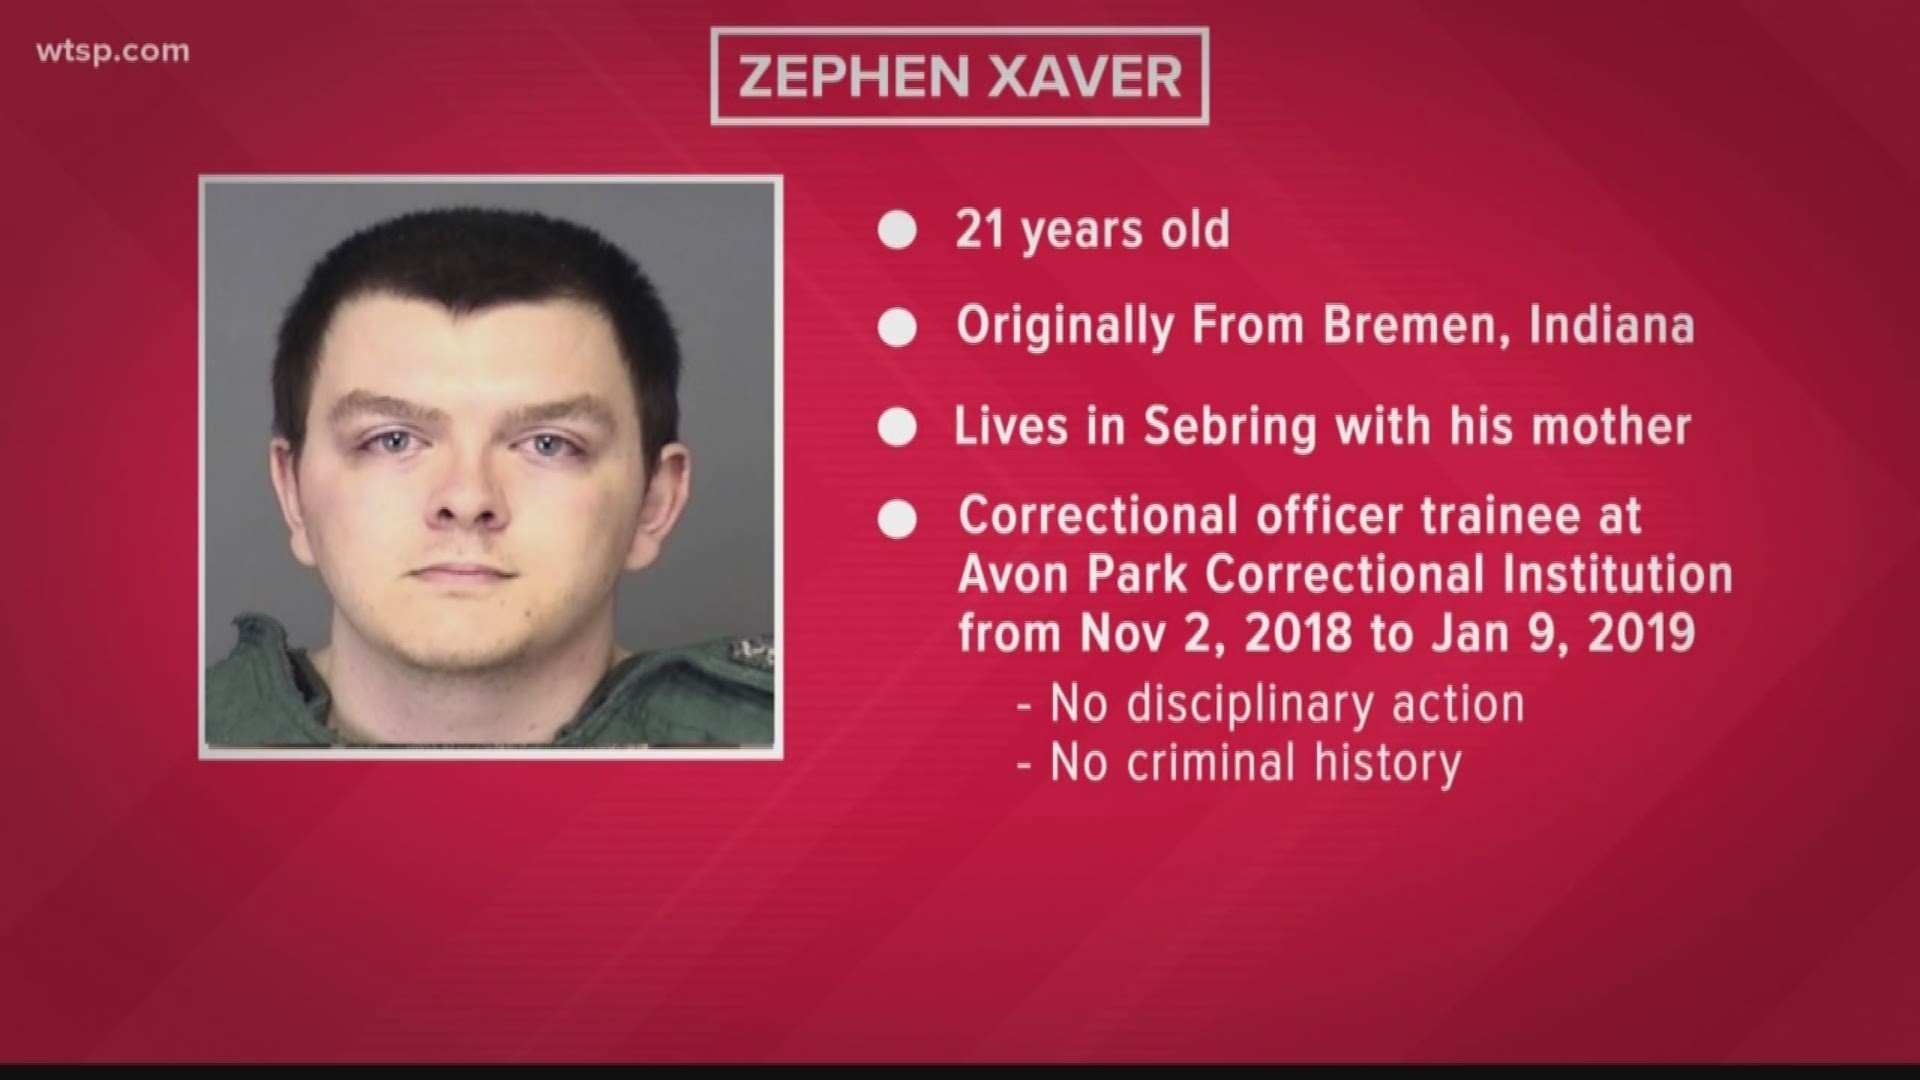 Zephen Xaver does not appear to have previous criminal history.